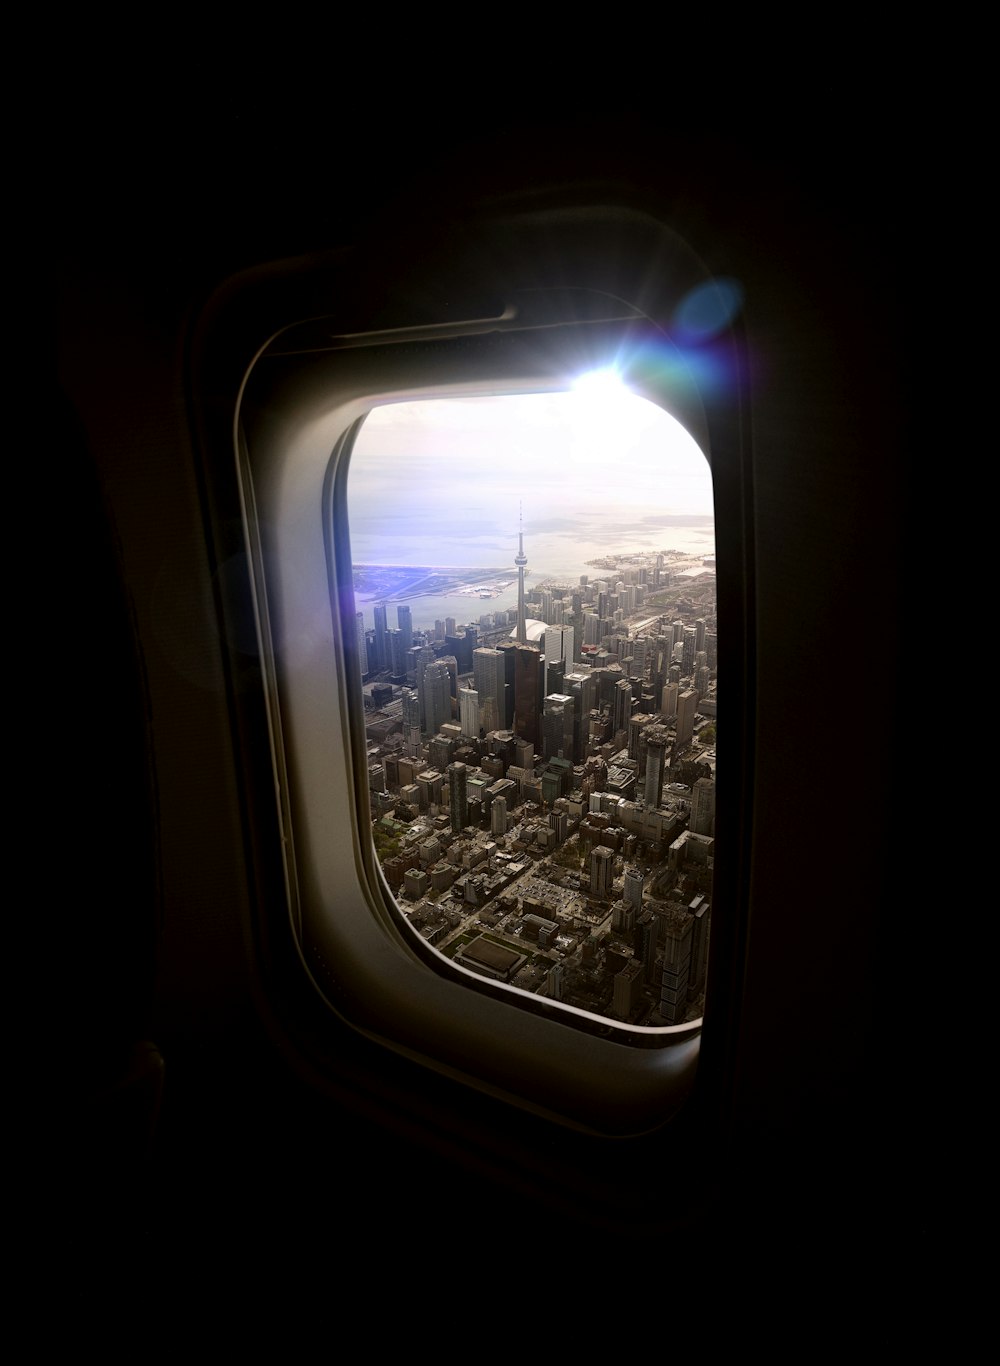 a view of a city from an airplane window